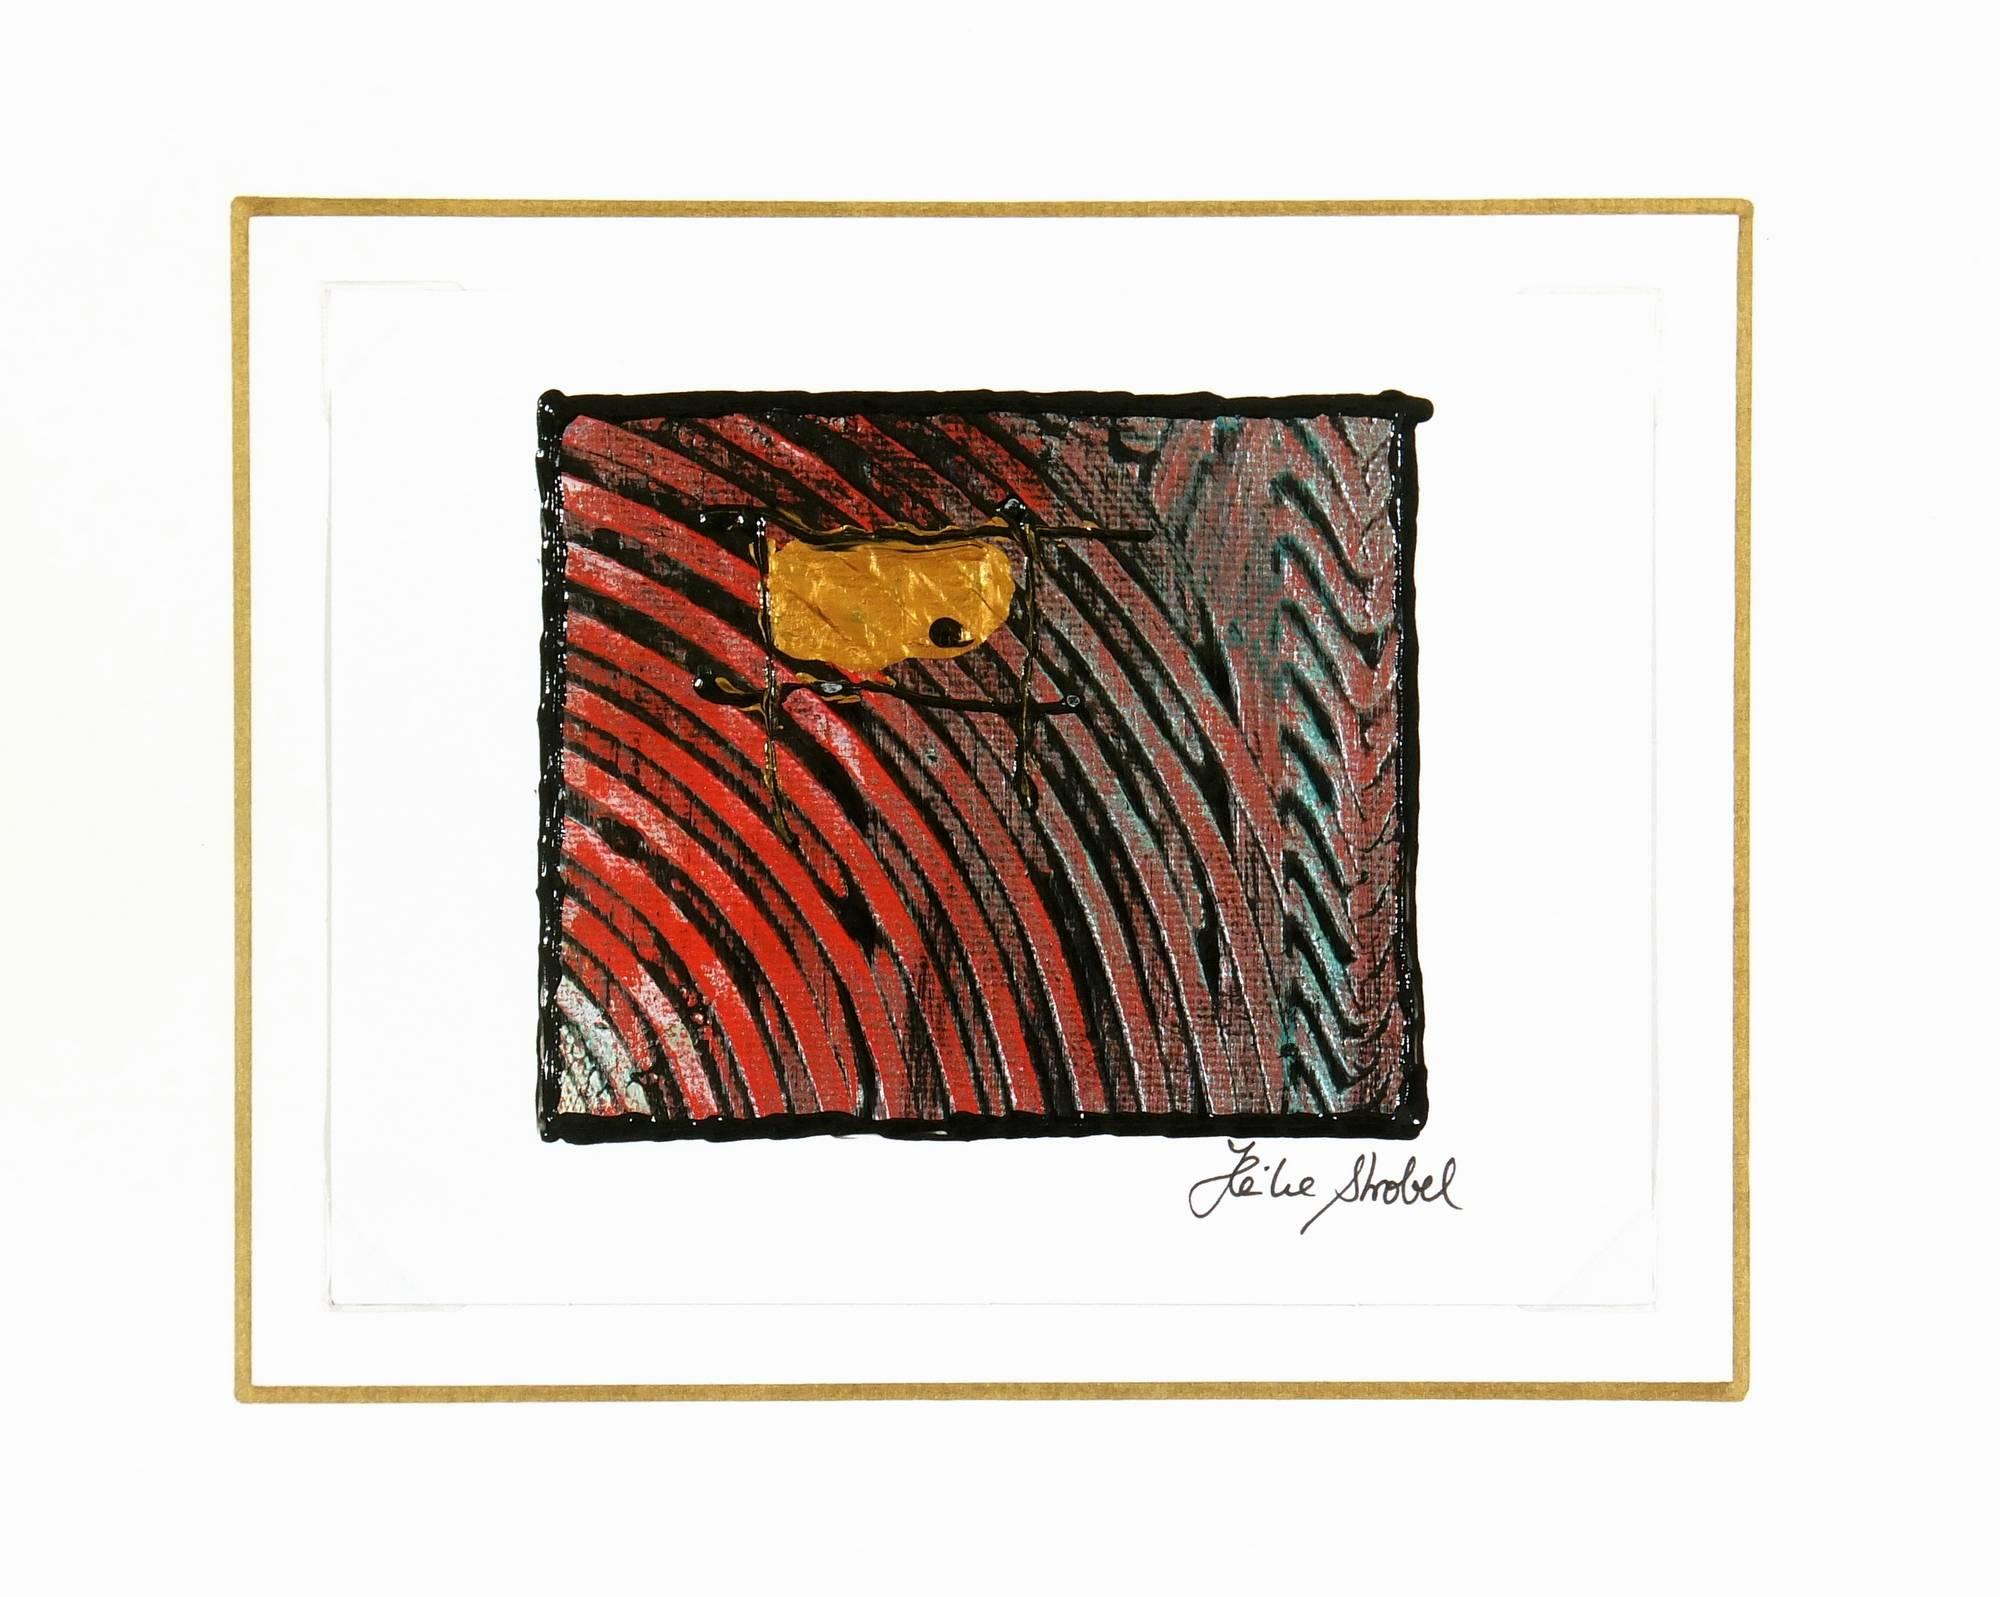 Fluid circular abstract in red and black with pop of yellow, circa 2000.  Signed lower right. 

Original artwork on paper displayed on a white mat with a gold border. Mat fits a standard-size frame.  Archival plastic sleeve and Certificate of